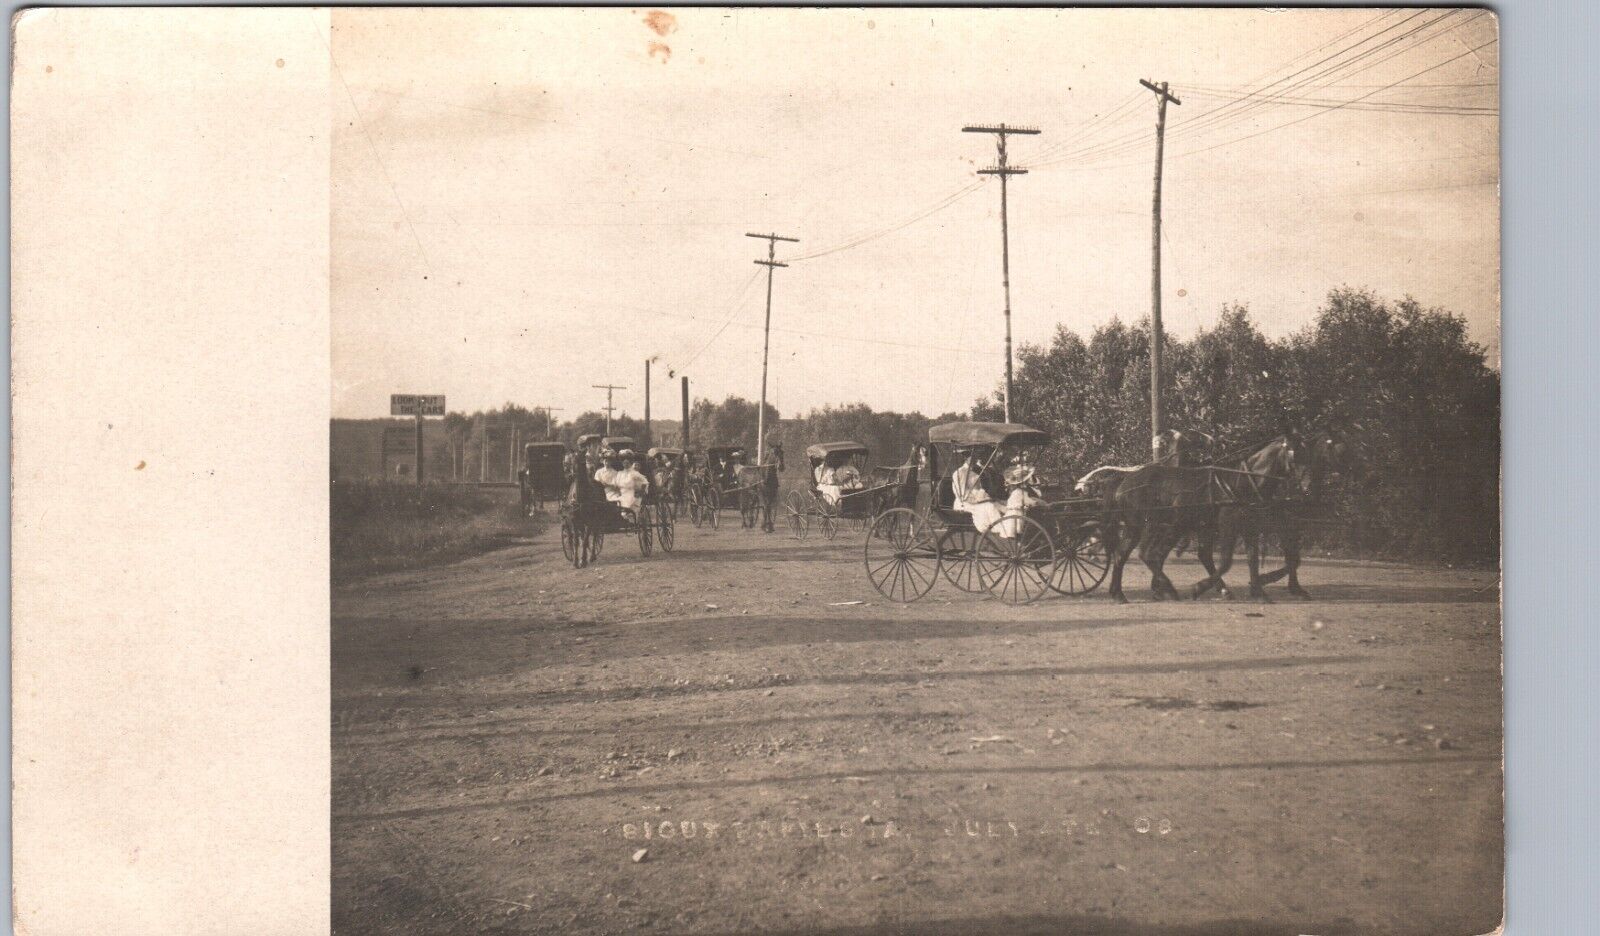 LADIES IN CARRIAGES ON ROAD sioux rapids ia real photo postcard rppc iowa horses